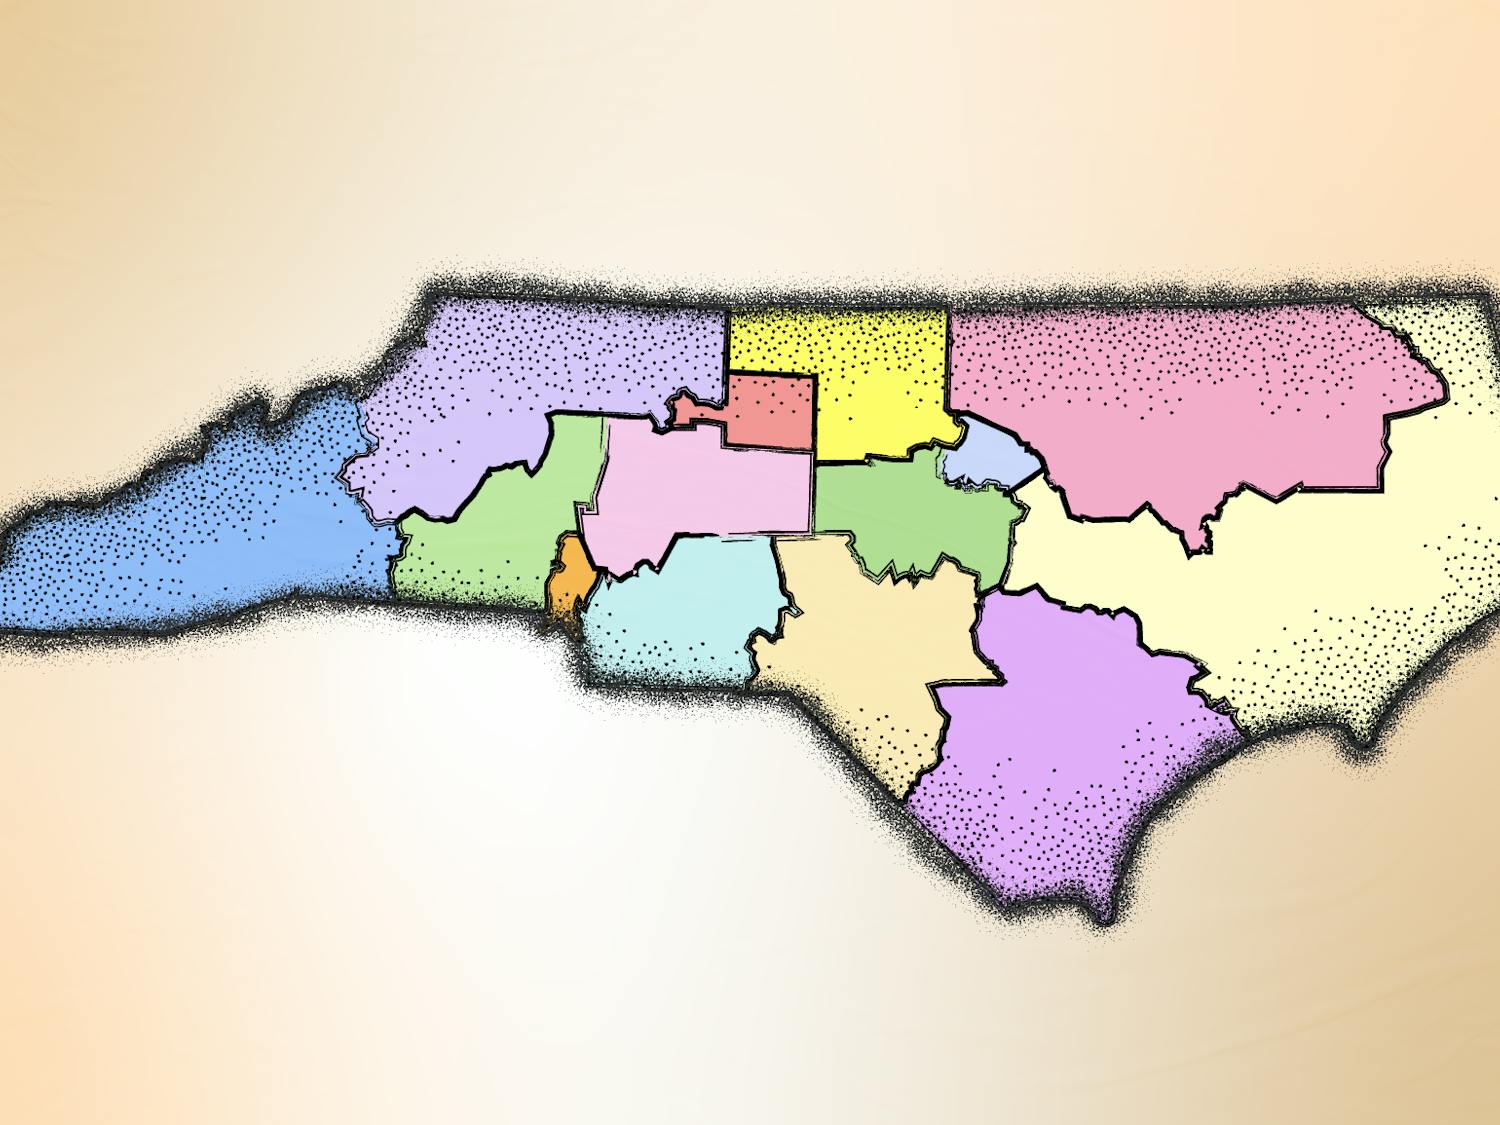 N.C. Sen. Ben Clark recently revealed a draft of his newly suggested CBK-4 map. His submission is intended to maintain regional integrity and create an even split between eastern and western districts across North Carolina.